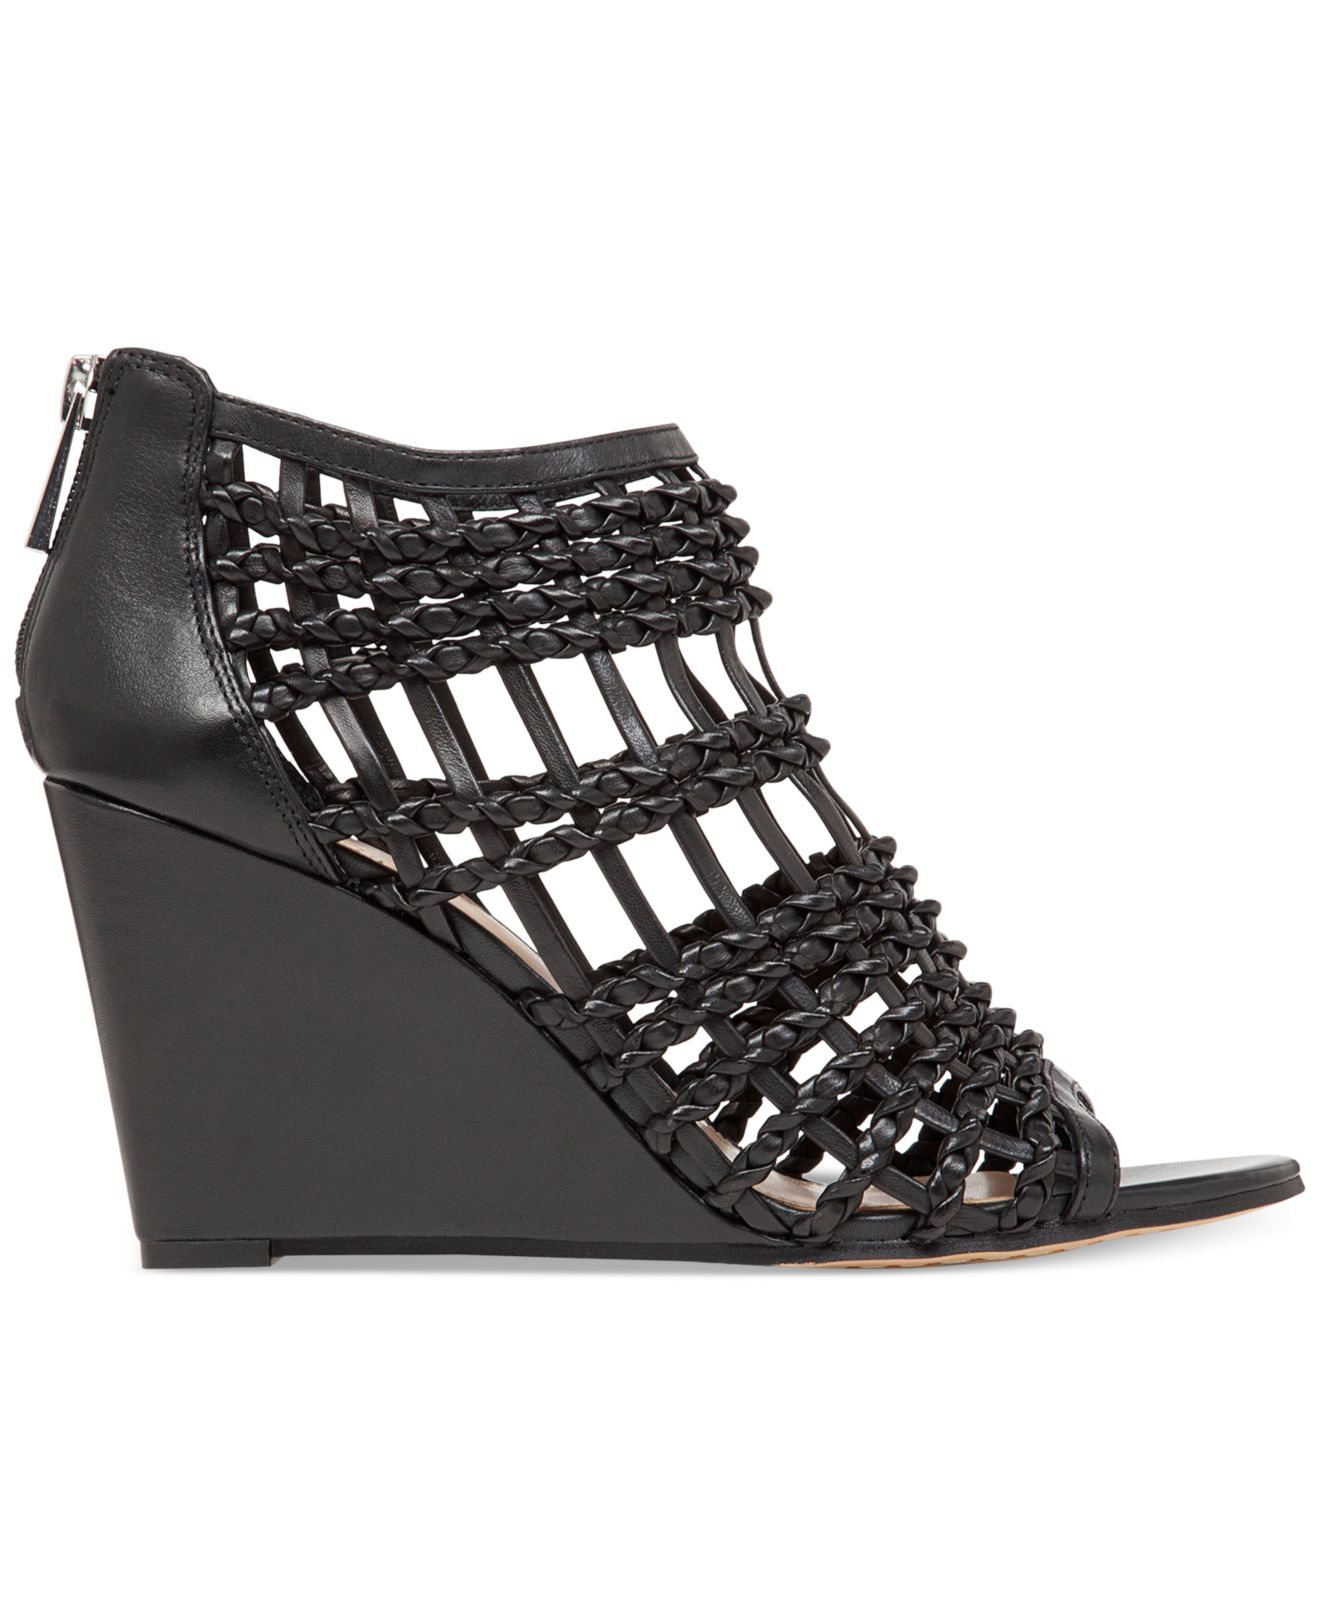 Vince Camuto Xya Wedge Sandals in Black - Lyst